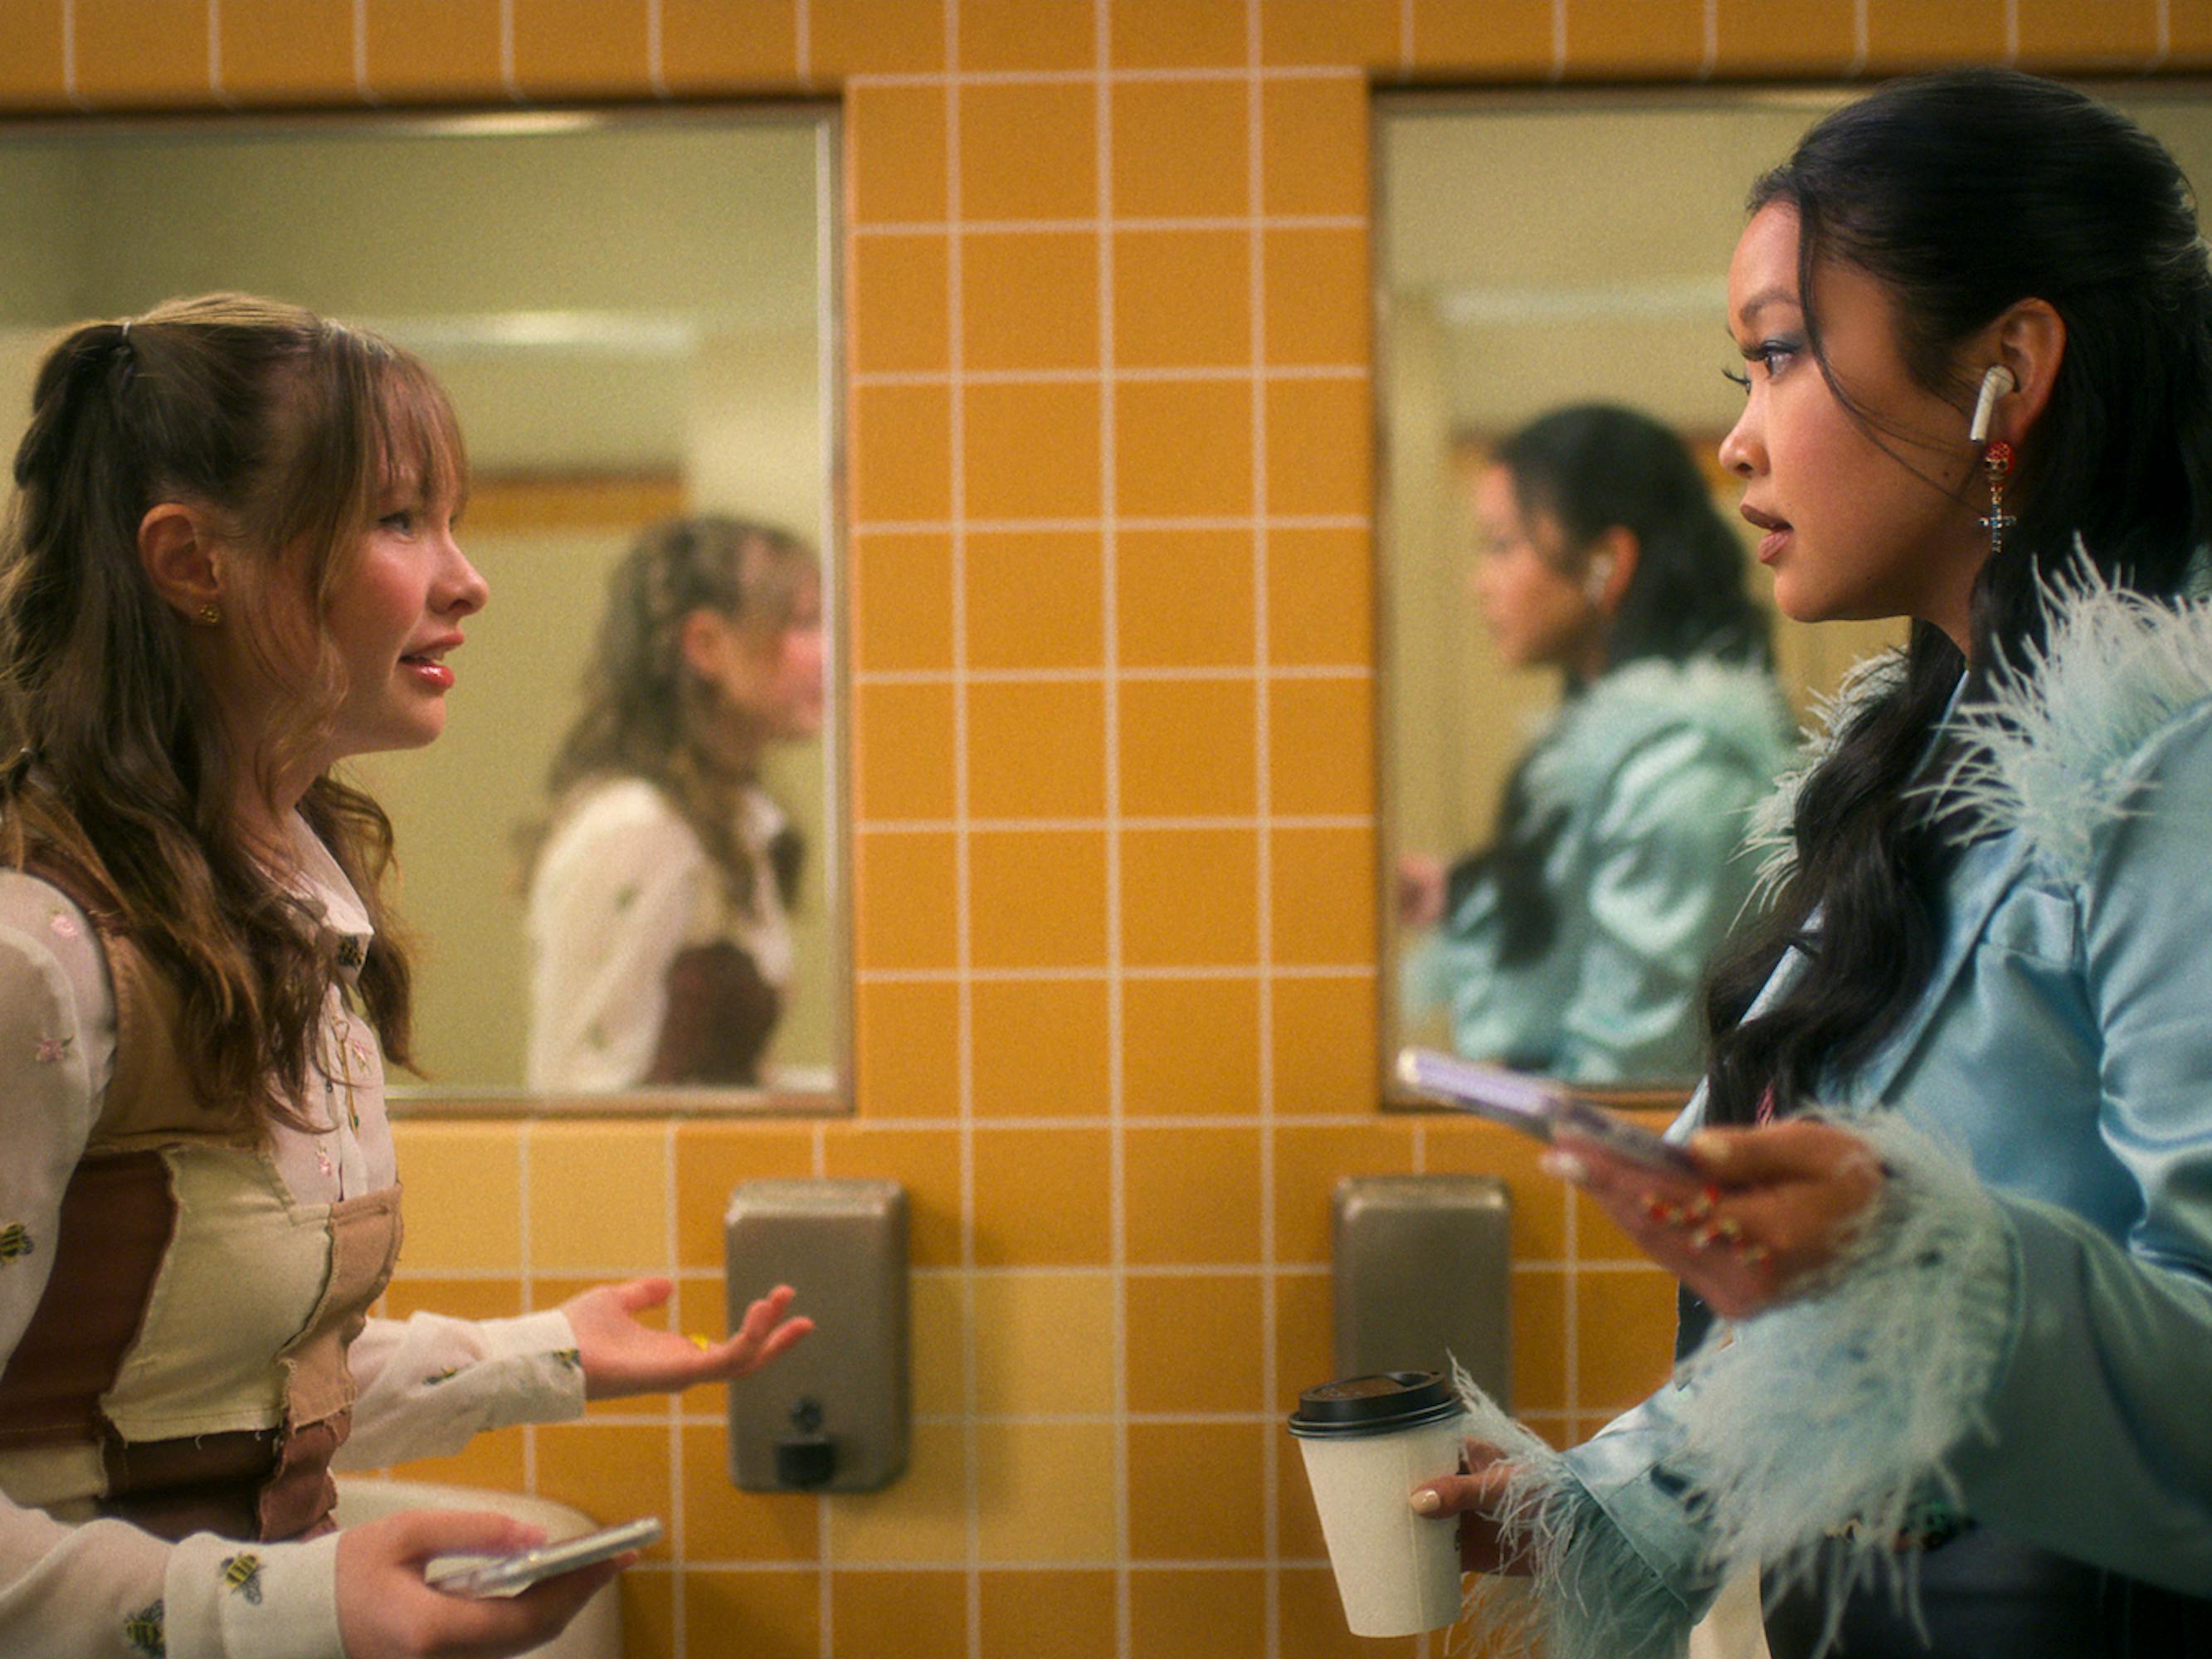 Gia (Zoe Margaret Colletti) and Erika (Lana Condor) wear fabulous outfits in a yellow-tiled bathroom.